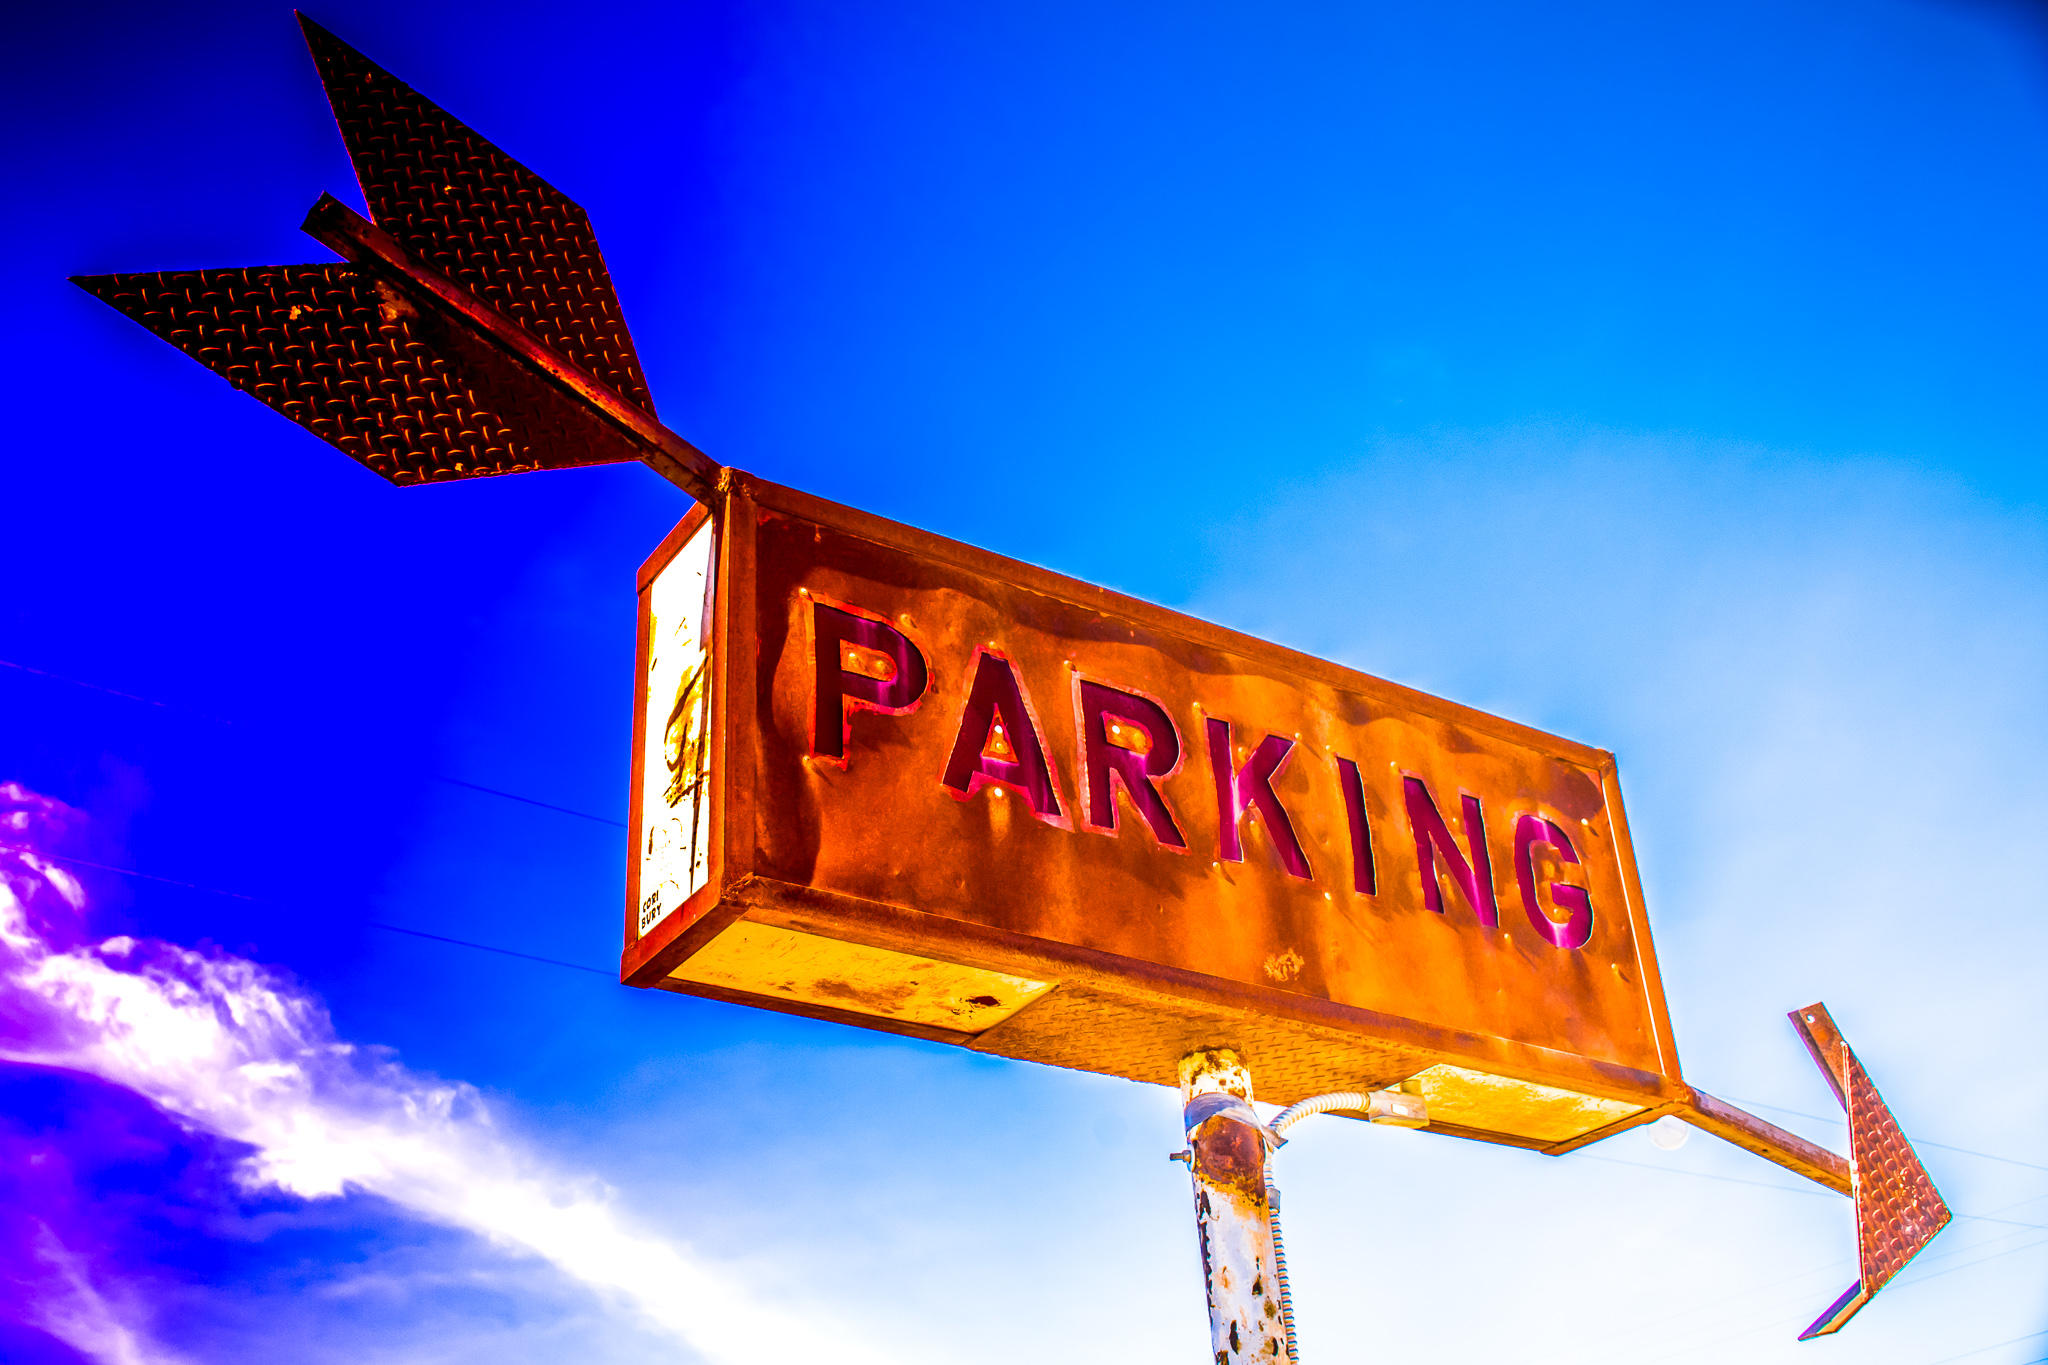 Parking – My Photography